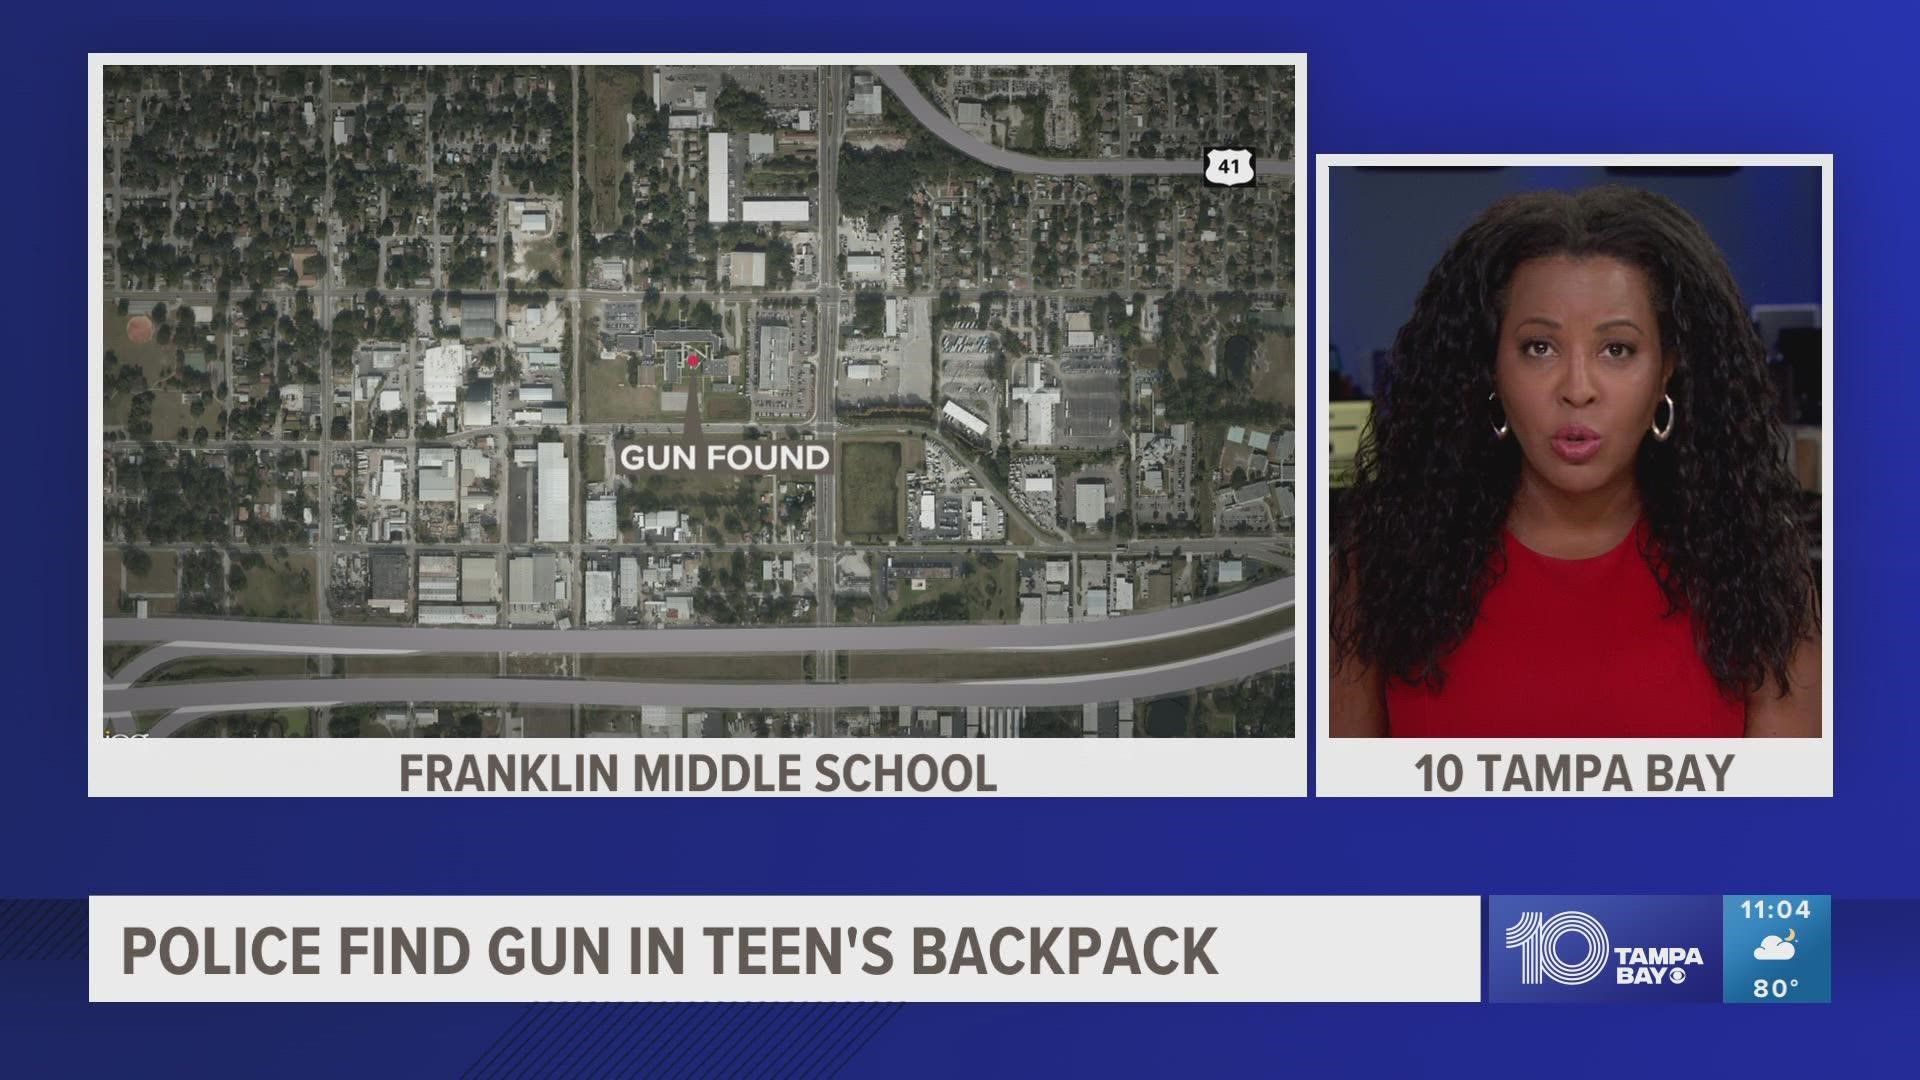 The 13-year-old told the school resource officer and staff he brought the loaded gun to school "for protection."